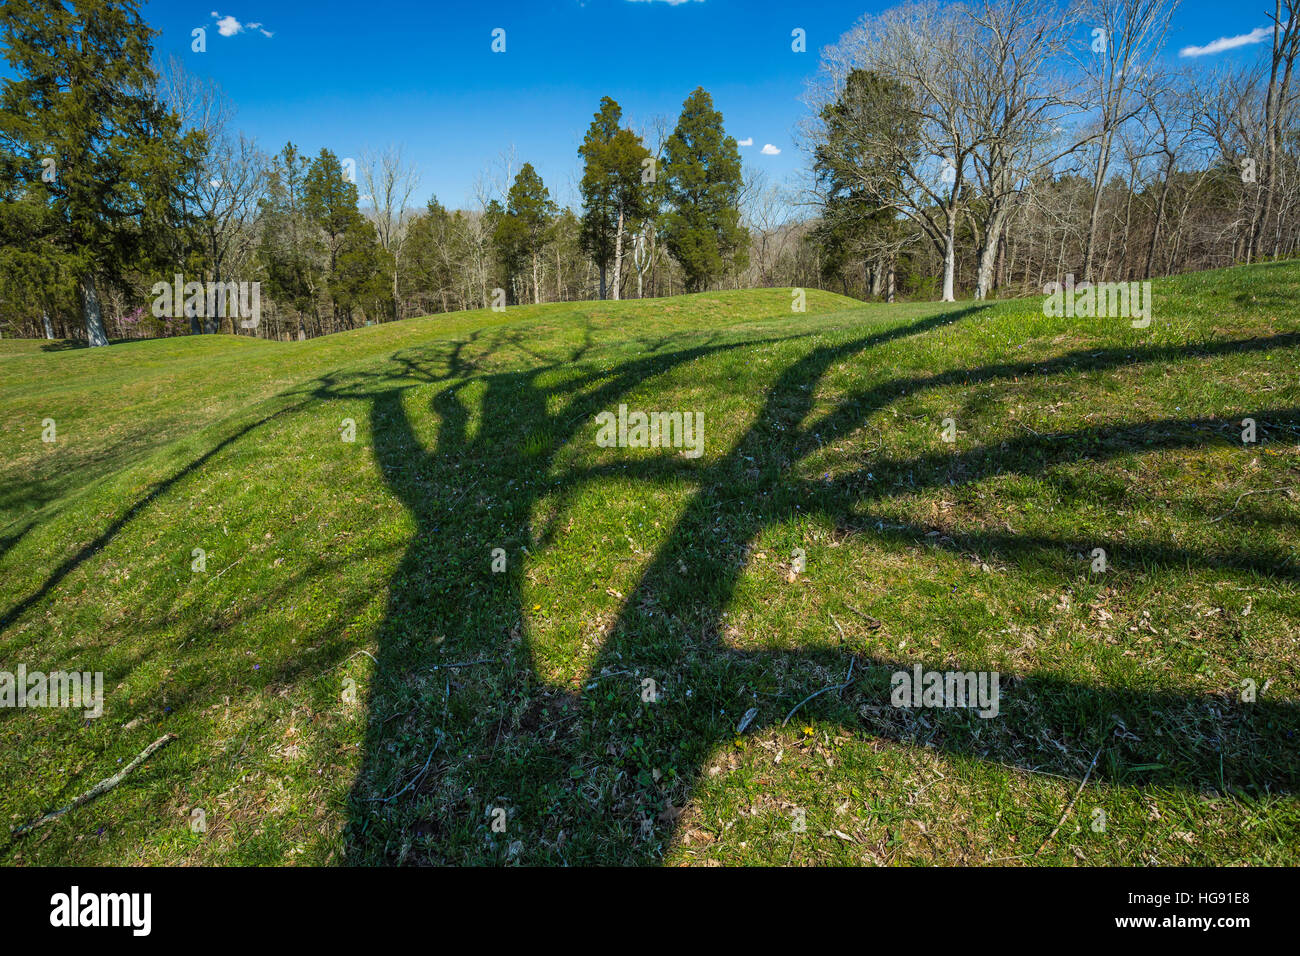 Spring tree shadows crossing part of the Great Serpent Mound, which snakes about ¼ mile over the landscape at Serpent Mound State Memorial in Adams Co Stock Photo